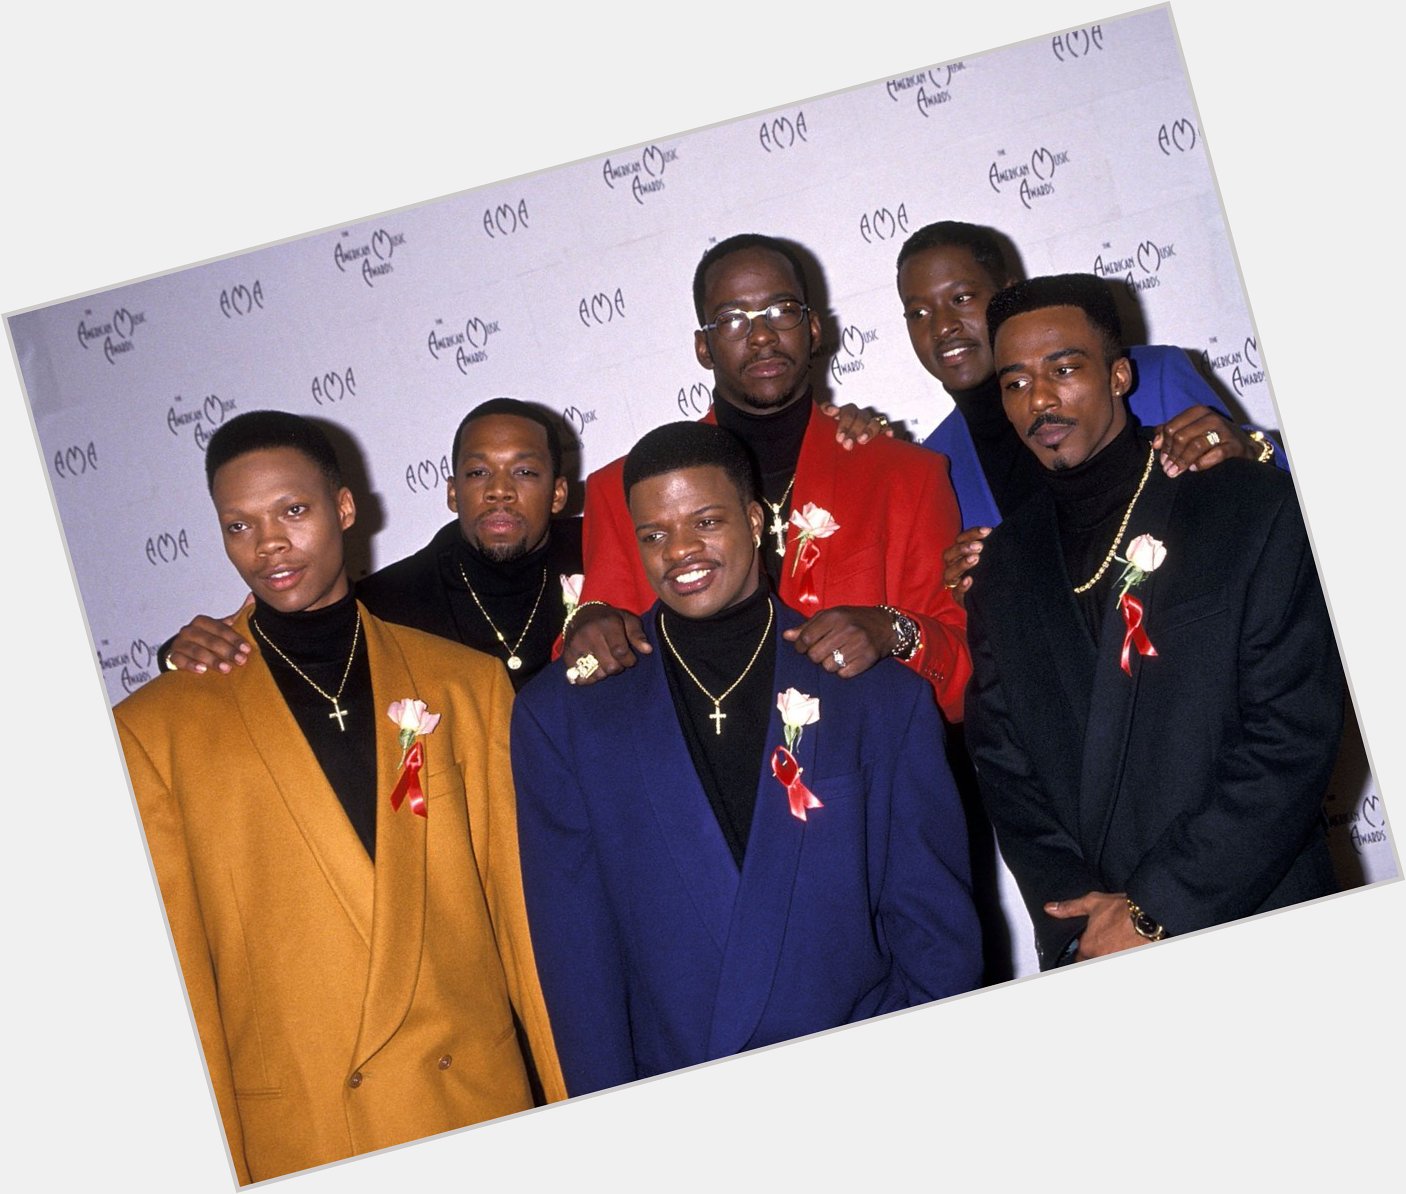 Happy Birthday to Bobby Brown(red jacket) who turns 49 today! 